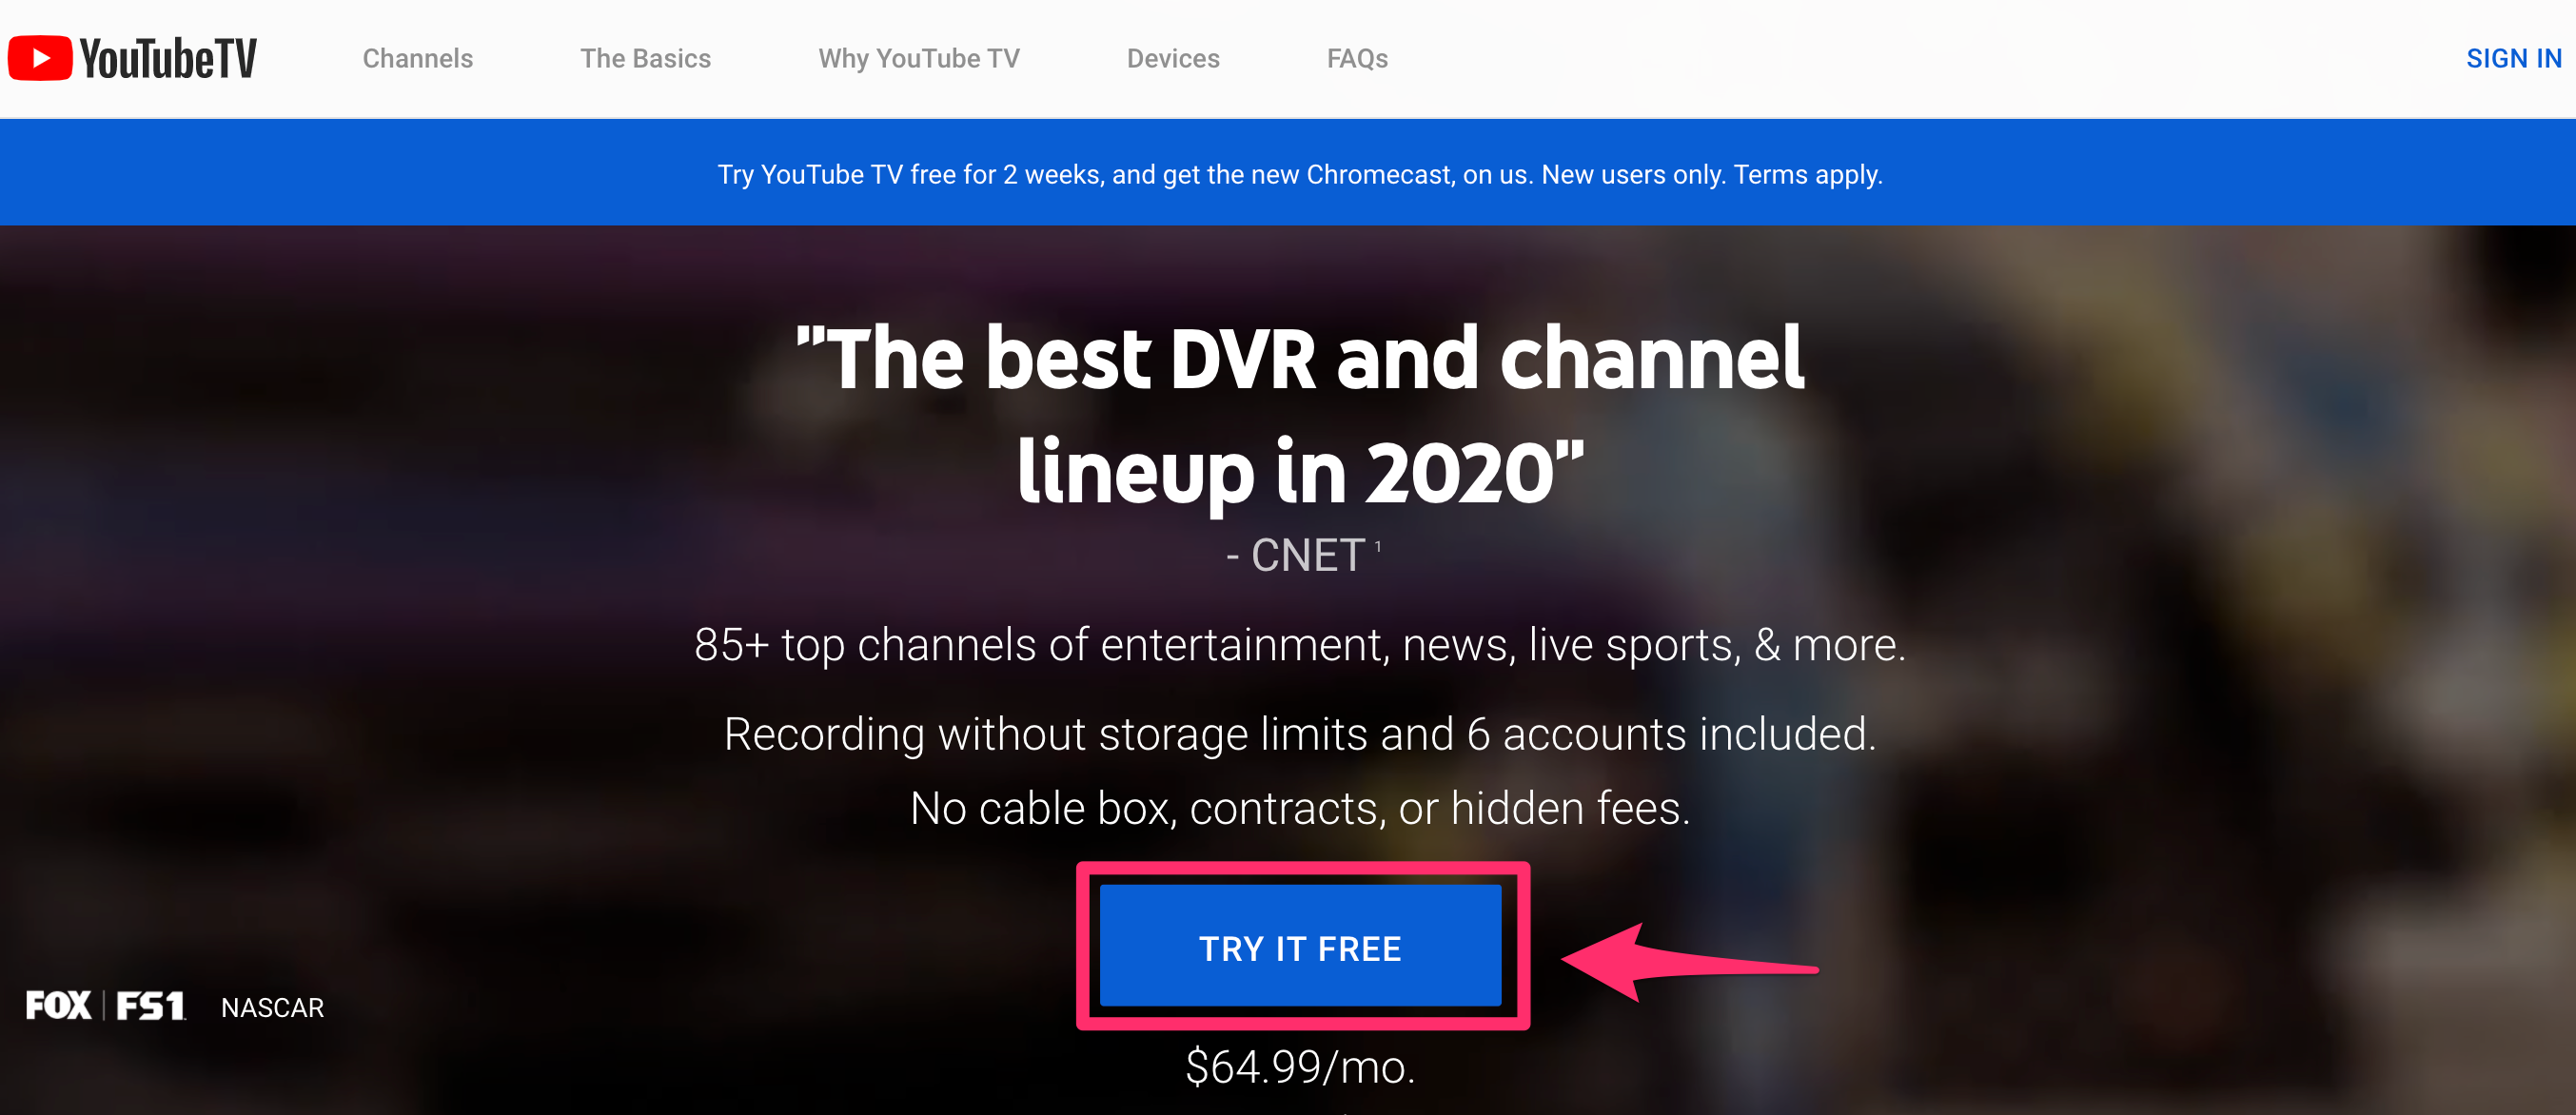 How to set up a YouTube TV account and customize your subscription in several ways